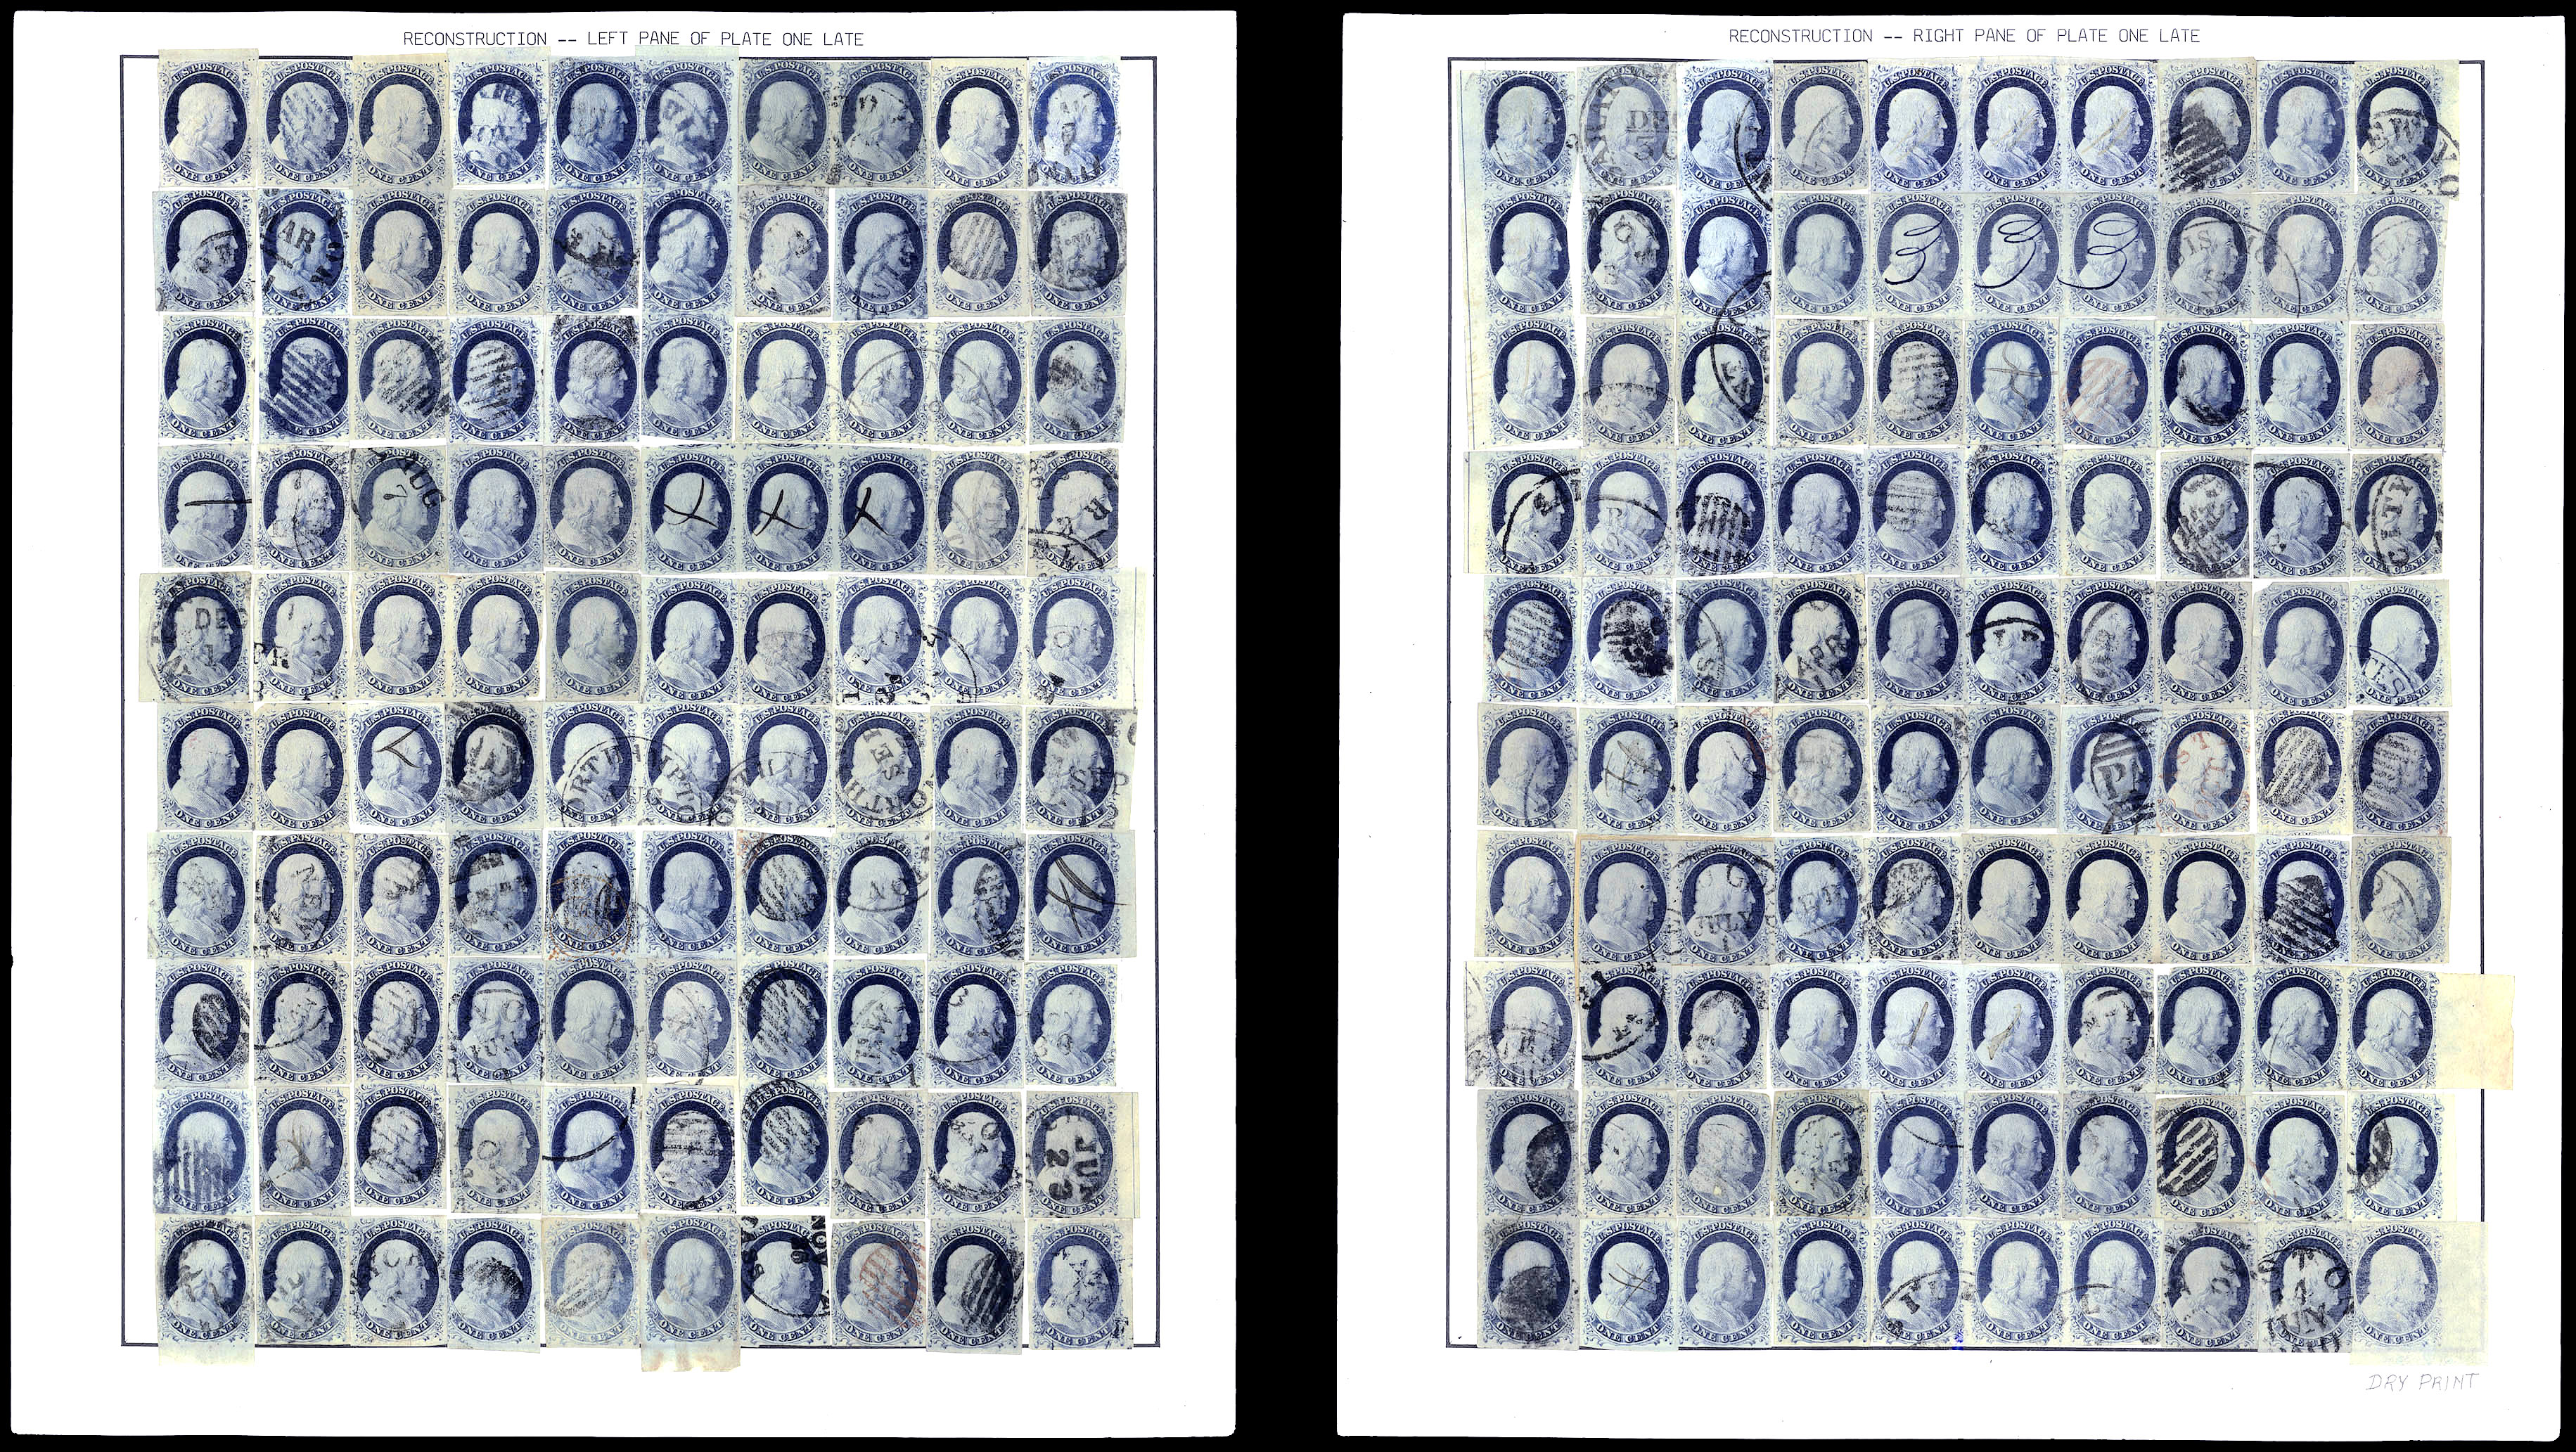 Plate 1 Late Plate Reconstrucion - US stamps